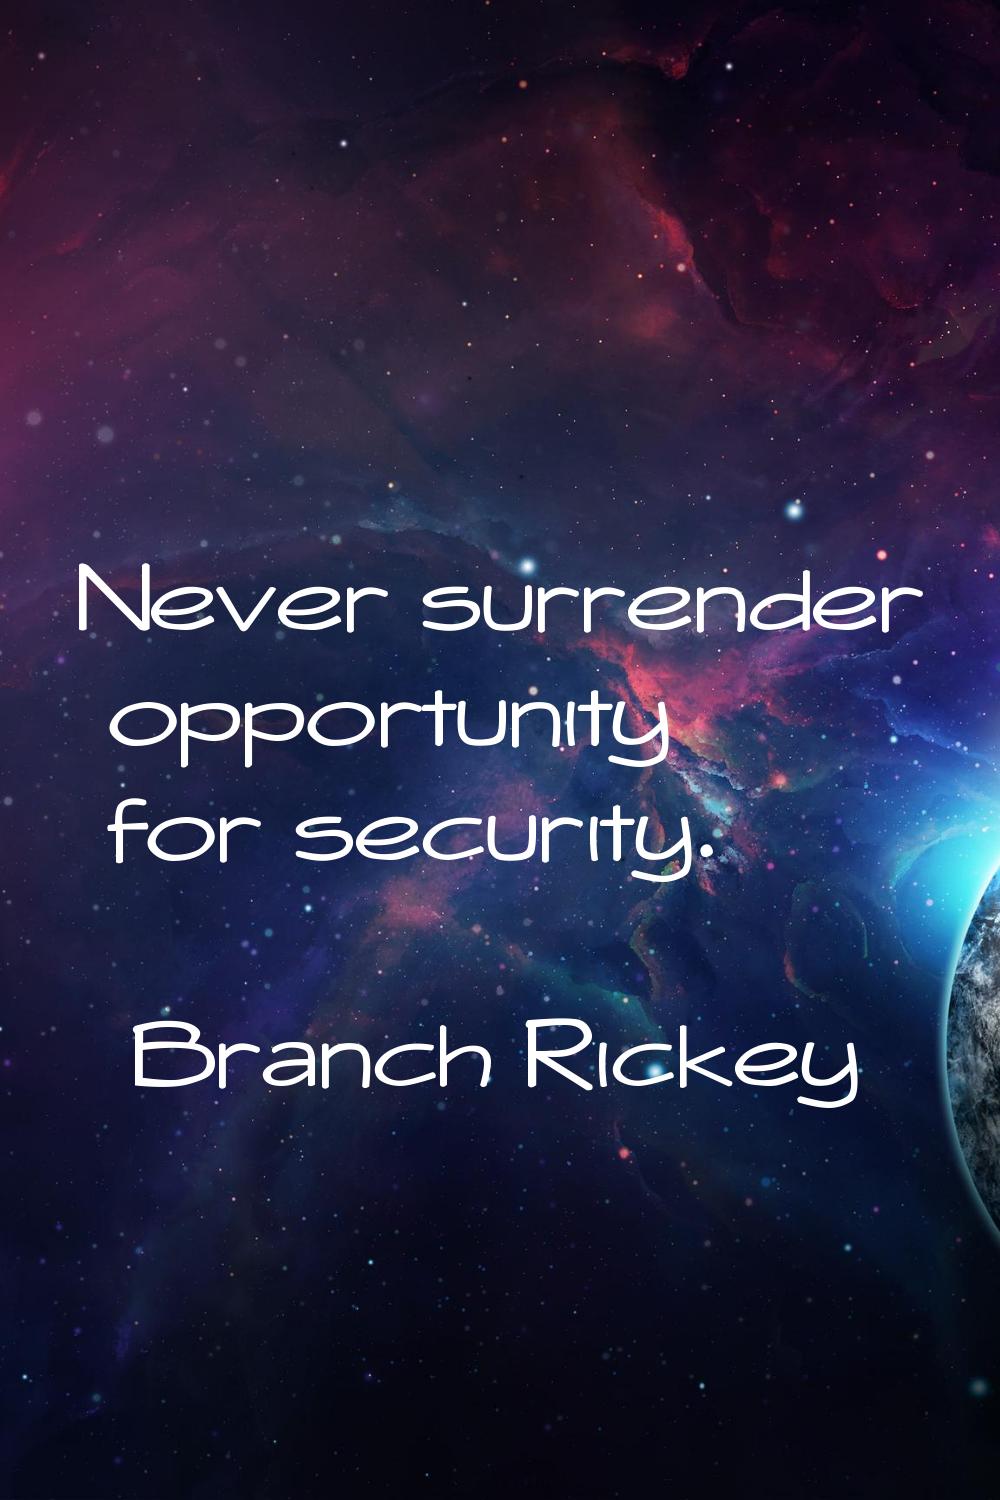 Never surrender opportunity for security.